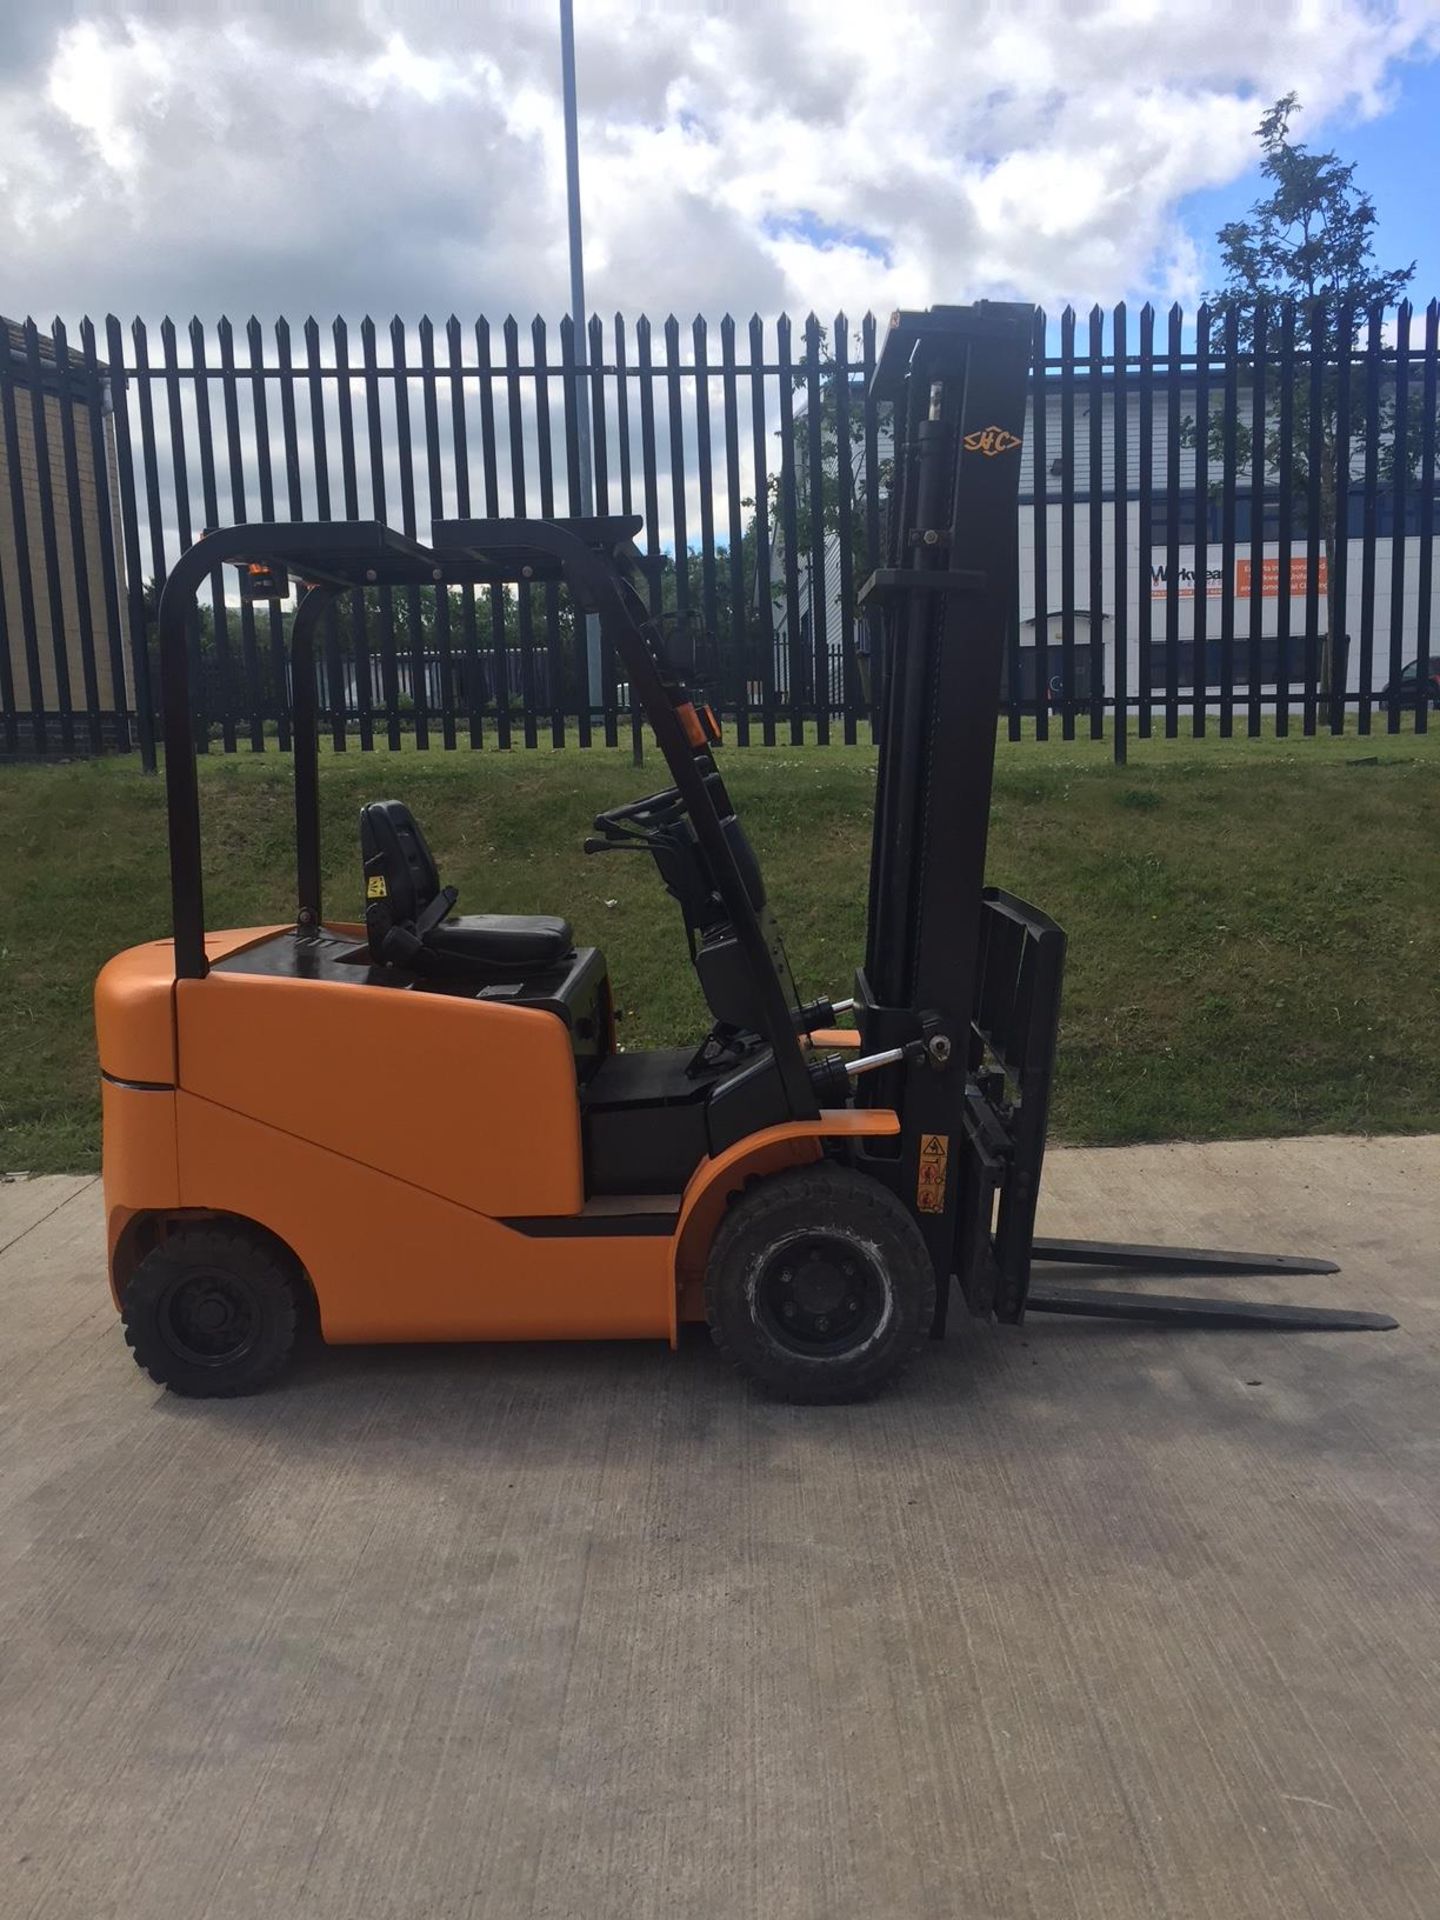 Sam-uk electric counterbalance fork lift truck - Fully refurbished and painted. - Image 2 of 9